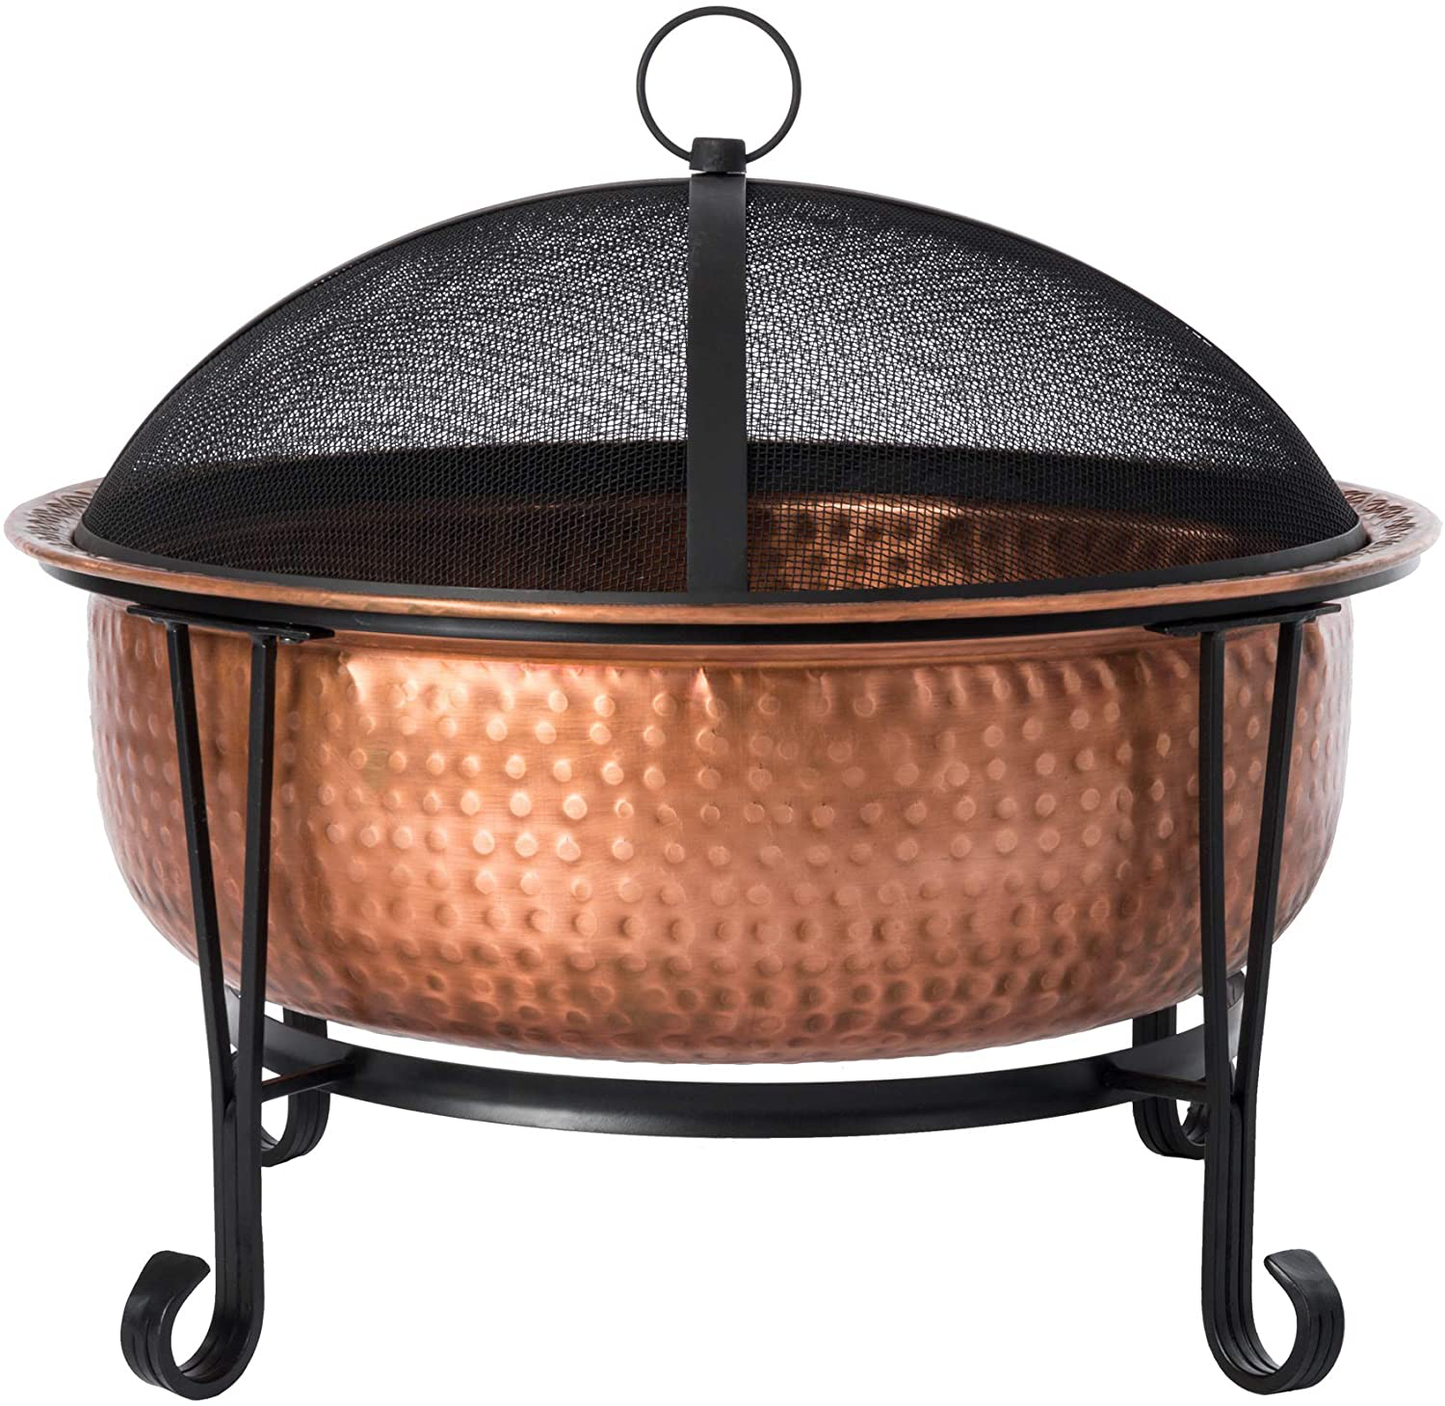 Fire Sense Palermo Copper Fire Pit with Steel Stand | Wood Burning | Mesh Spark Screen, Steel Grate, Screen Lift Tool, and Vinyl Weather Cover Included | Lightweight Portable Patio and Outdoor Heater